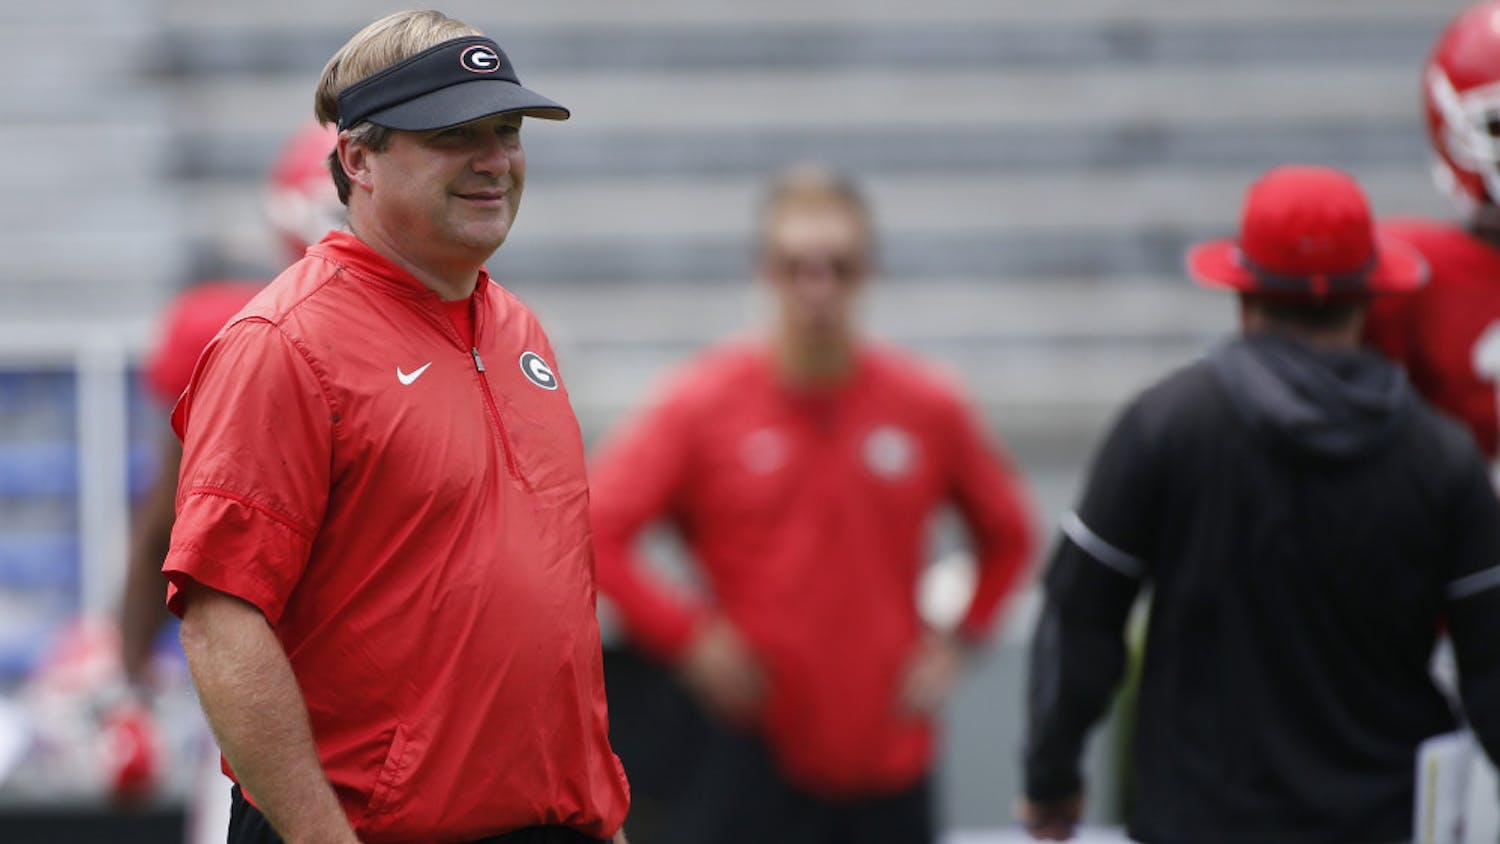 Georgia coach Kirby Smart looks on during an NCAA college football practice at Sanford Stadium in Athens, Ga., Saturday, Aug. 10, 2019.